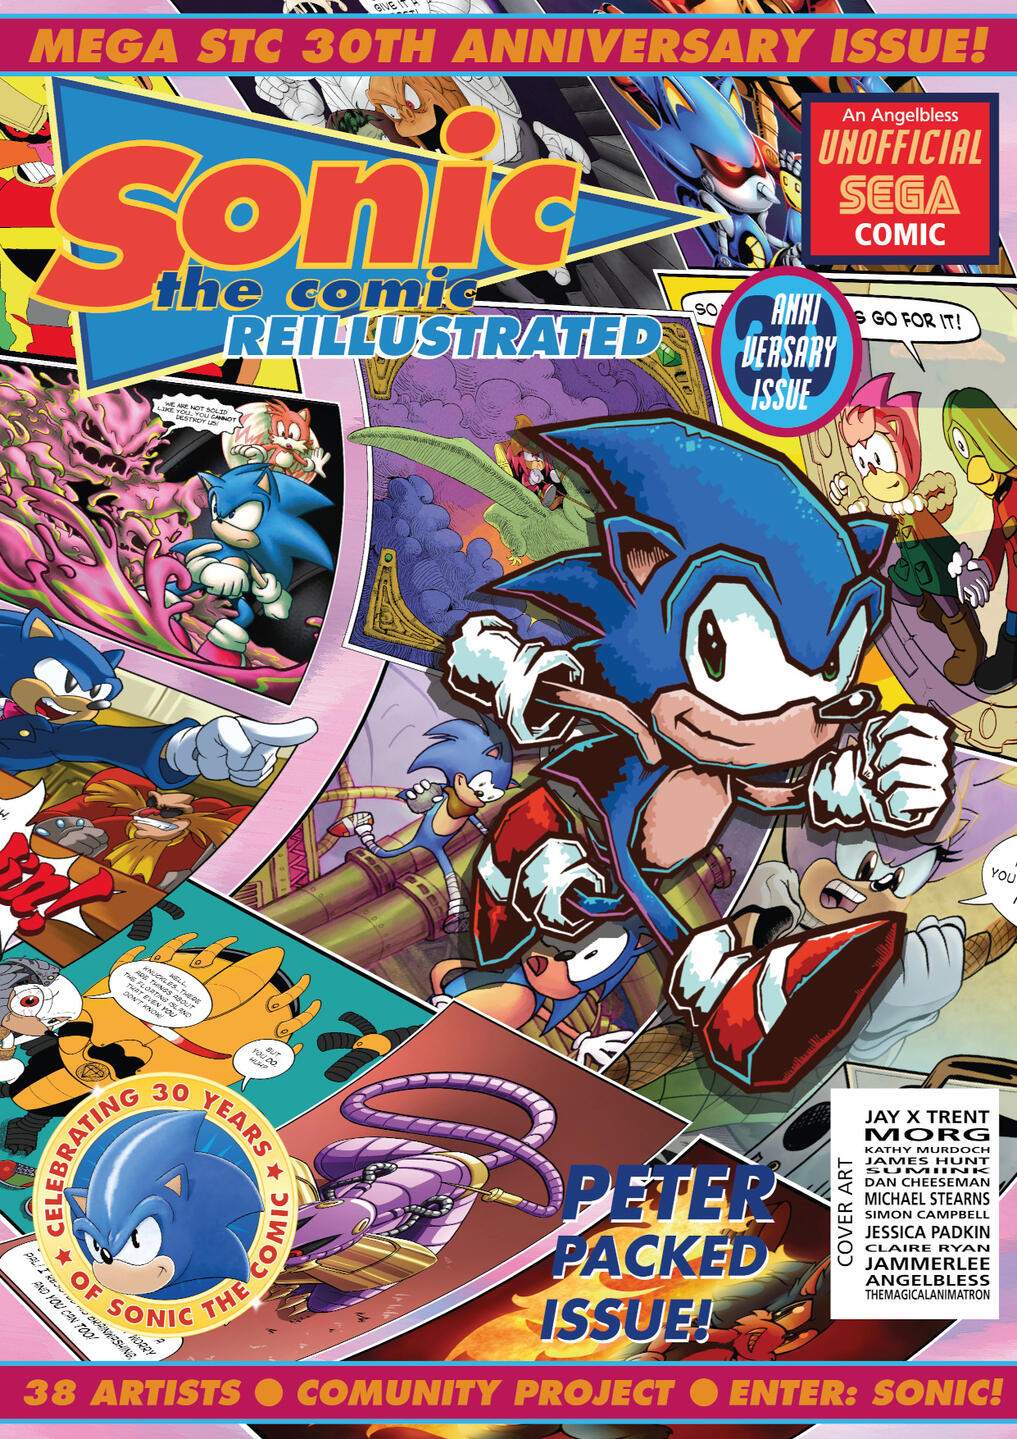 Sonic the Comic: Reillustrated Issue 3